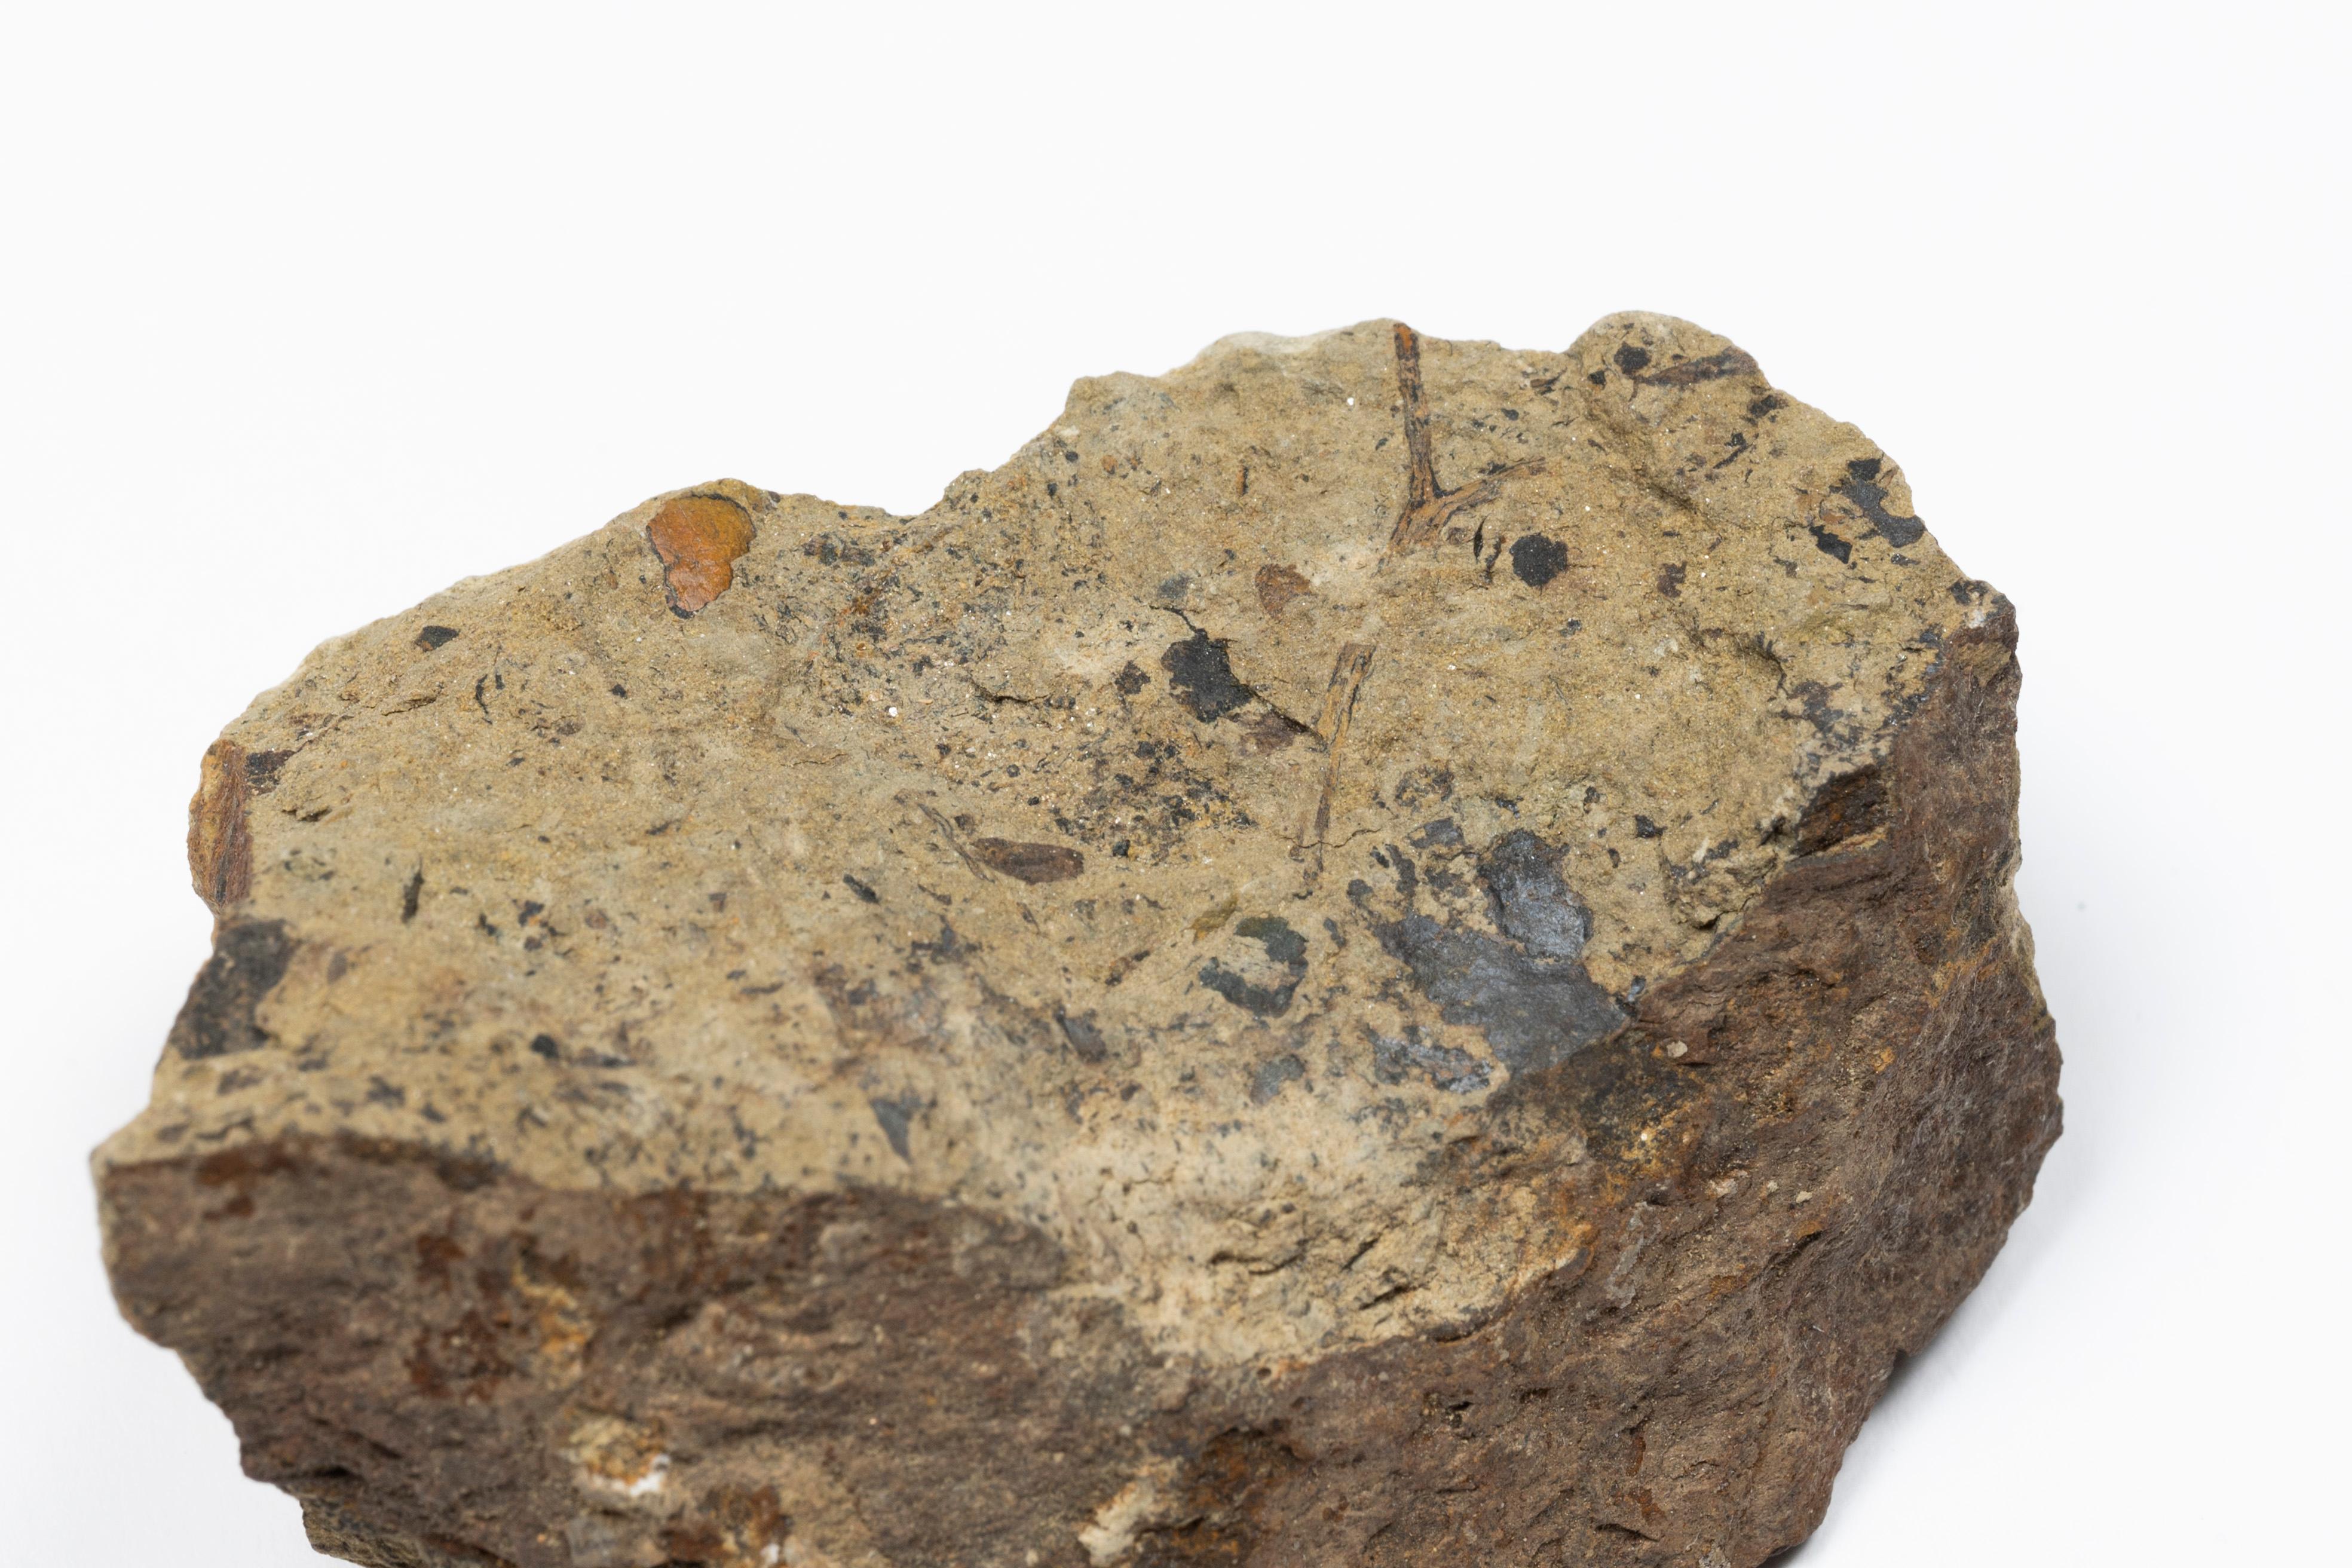 Part of the permanent exhibition "Extinction·Resilience" at the Palaeontology Gallery at the Hong Kong Science Museum will be temporarily closed from April 6 (Saturday) to the end of April for renewal of exhibits. Photo shows a fossil of Cooksonia barrandei formed 423 million years ago, which is one of the earliest land plants on Earth . It will be displayed after the renewal of exhibits.